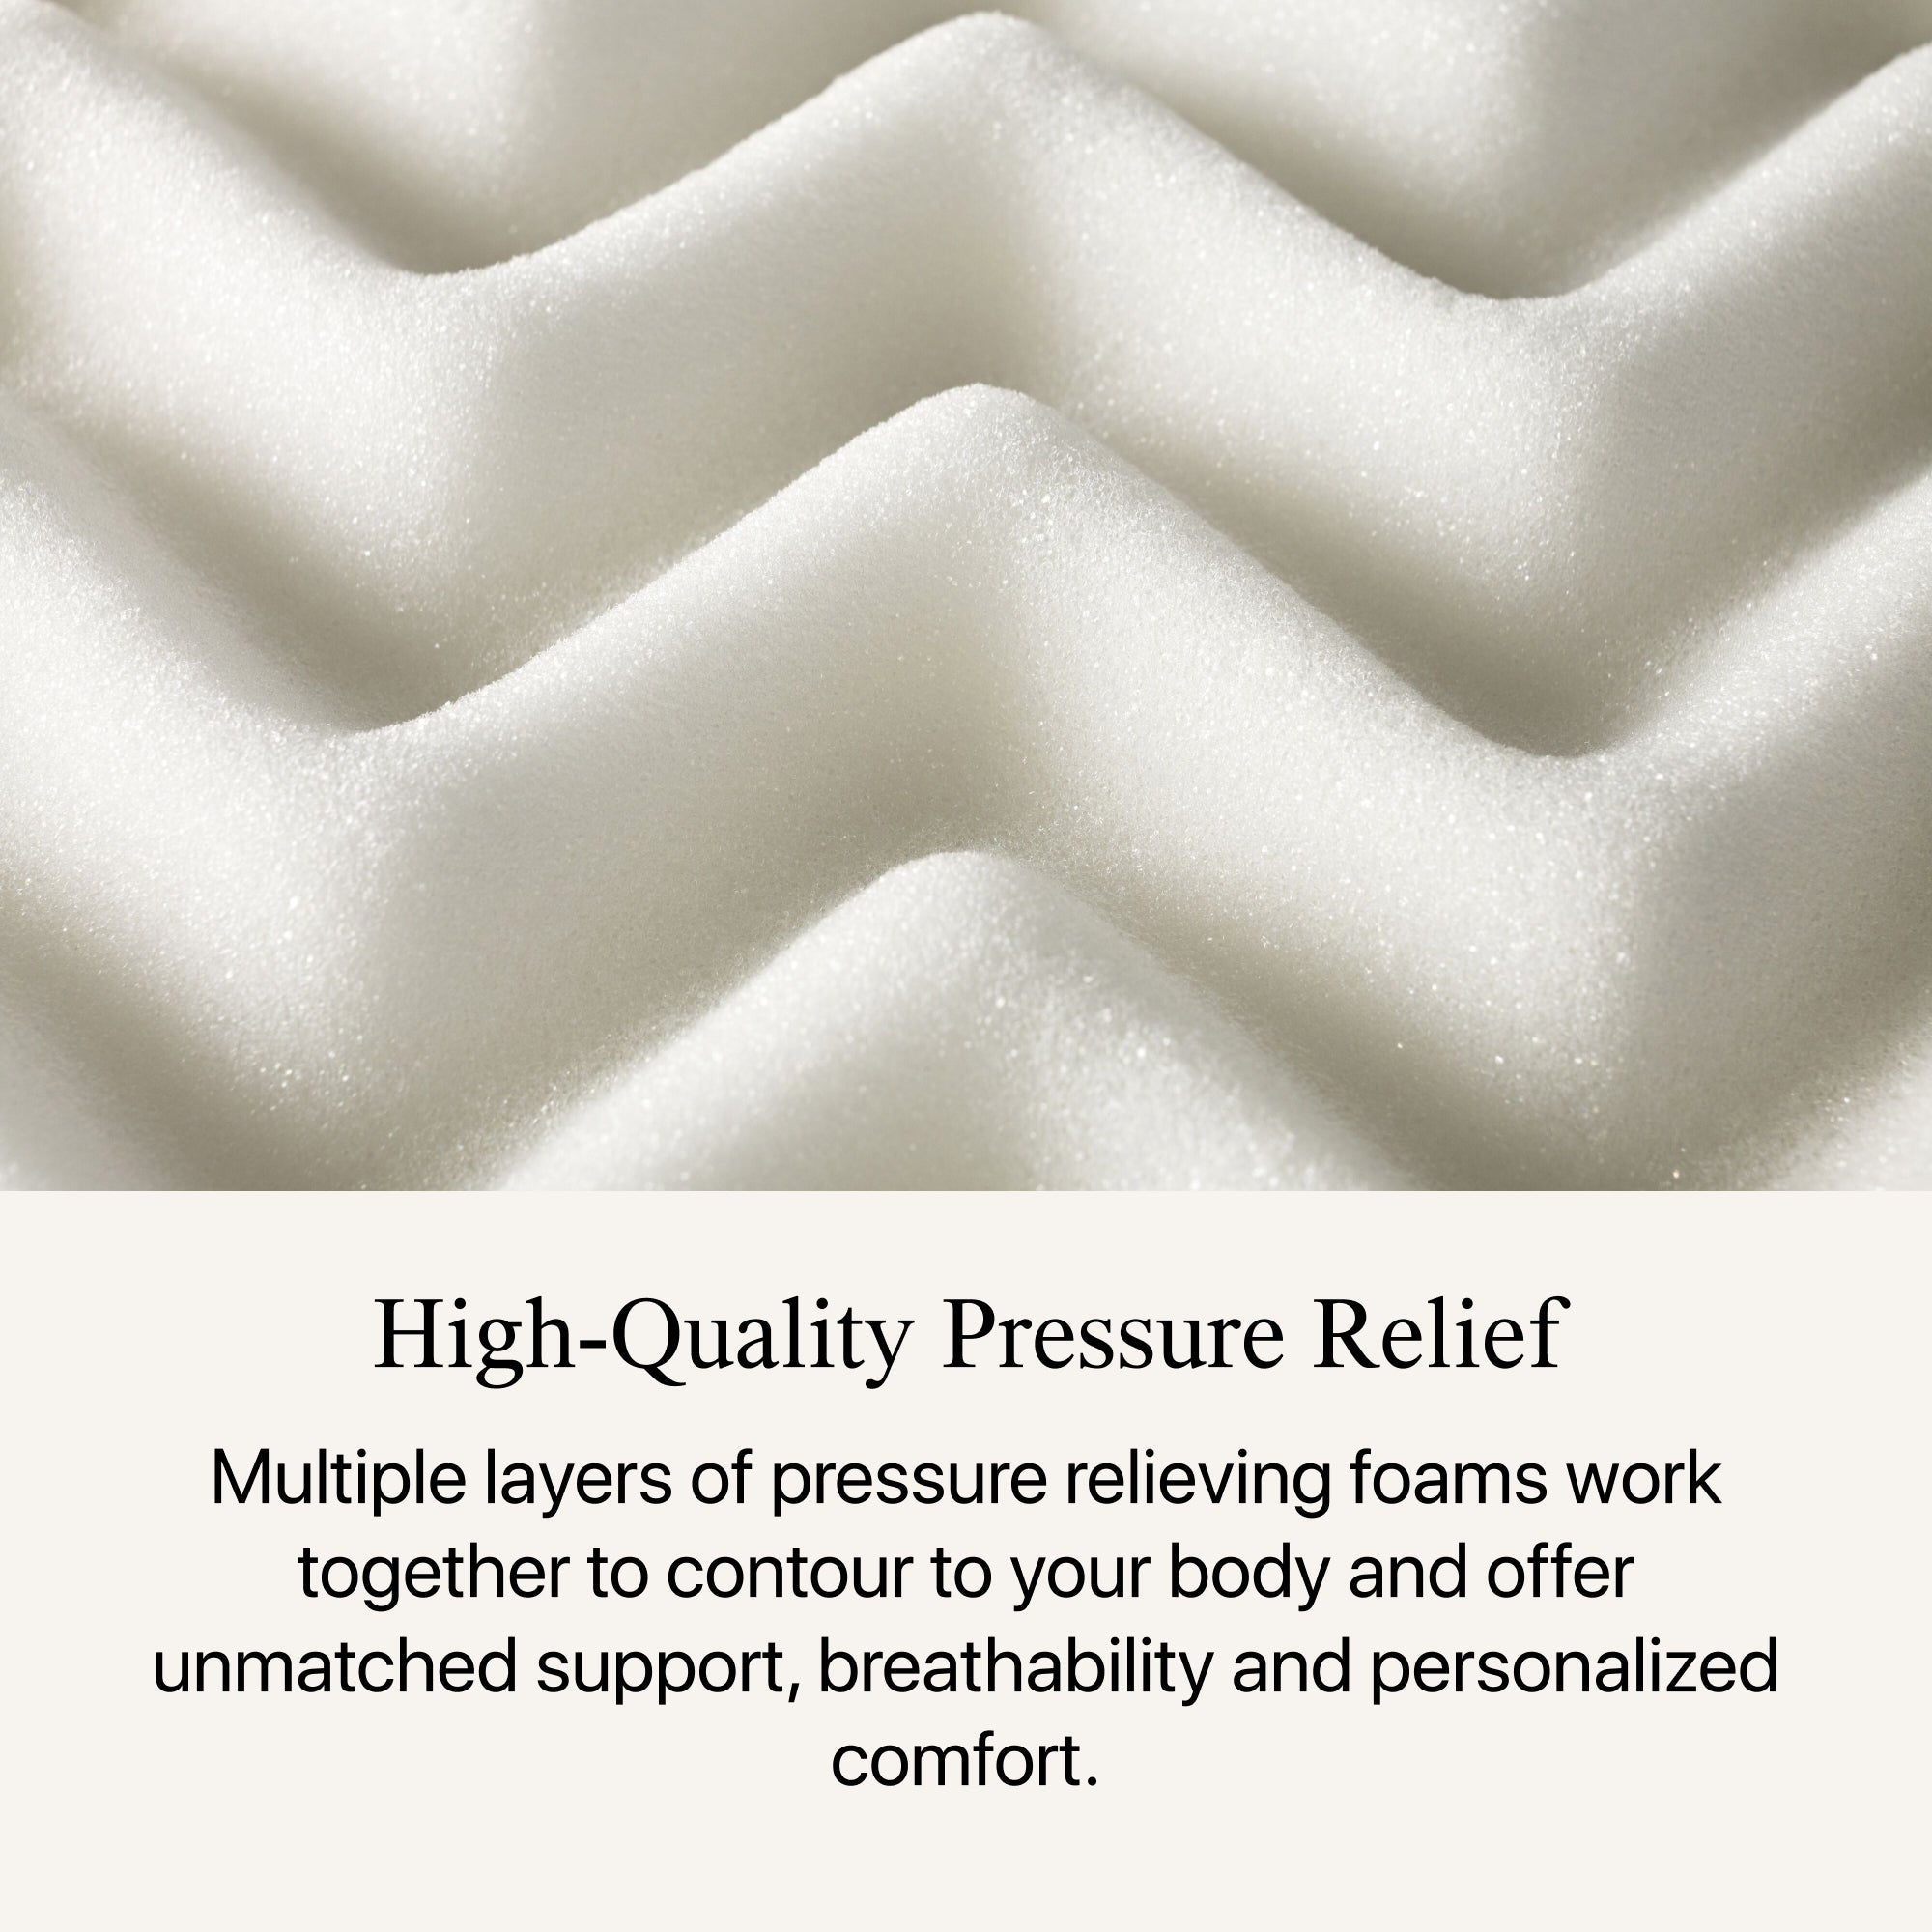 Close-up view of the material on the Beautyrest Select hybrid mattress ||feel: Firm